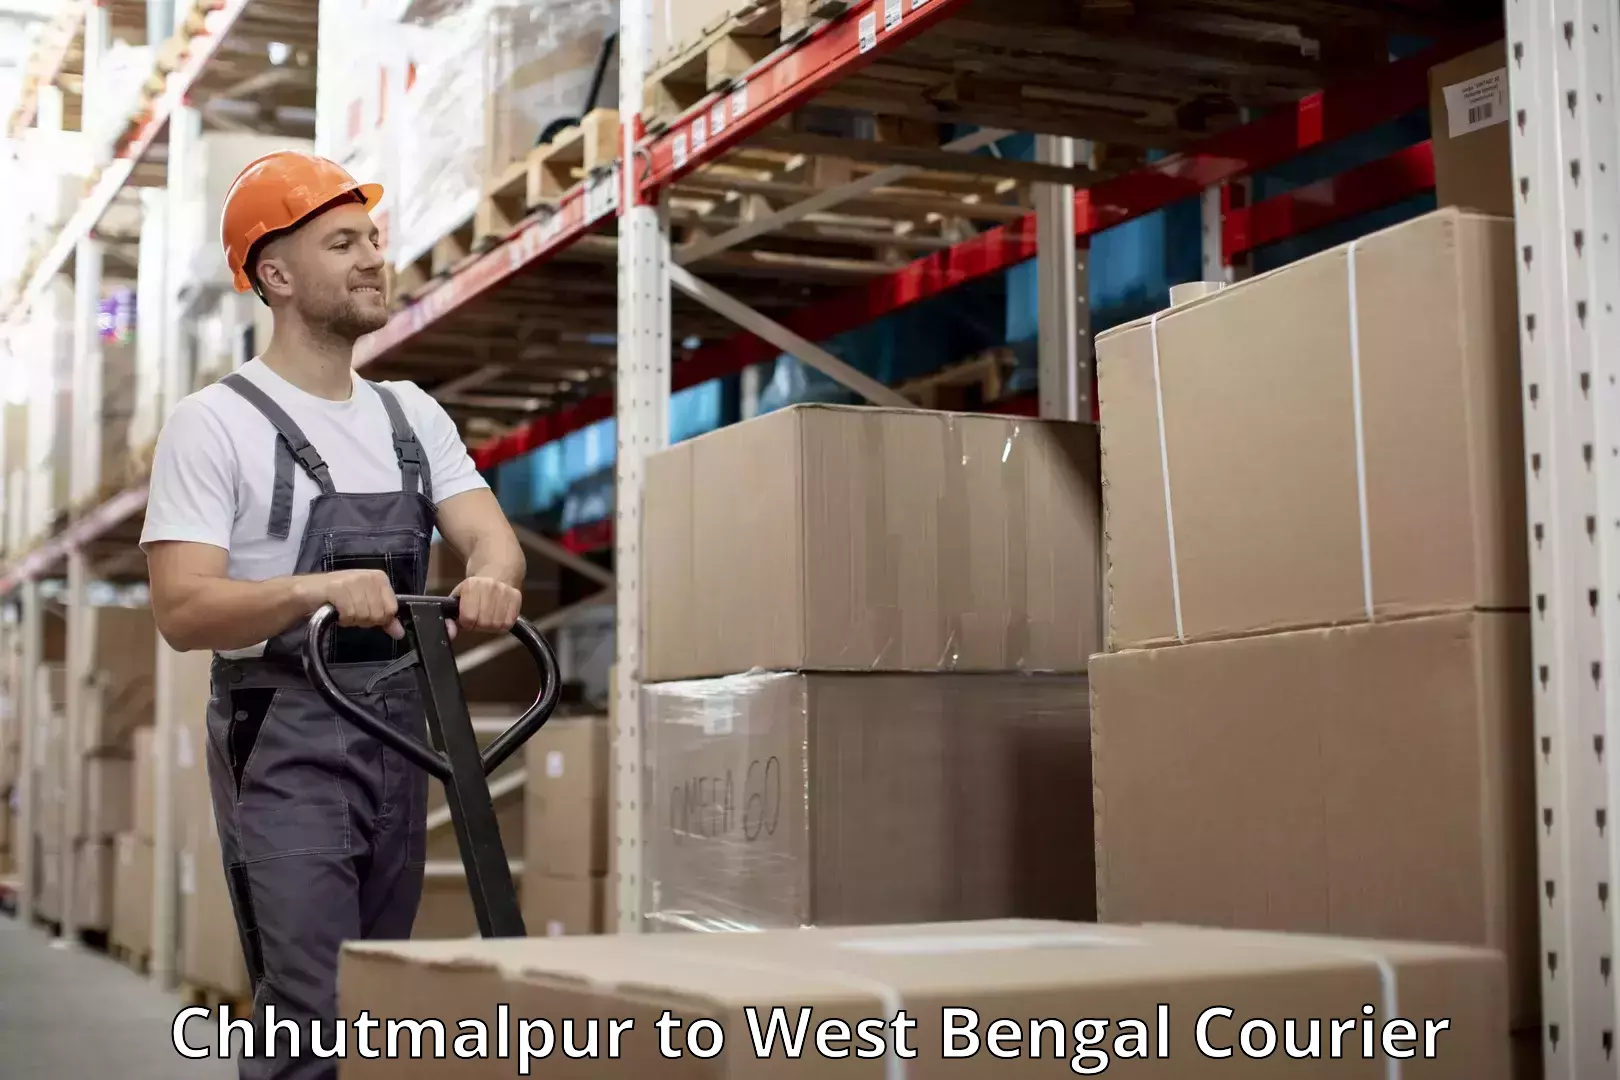 Hassle-free luggage shipping Chhutmalpur to West Bengal